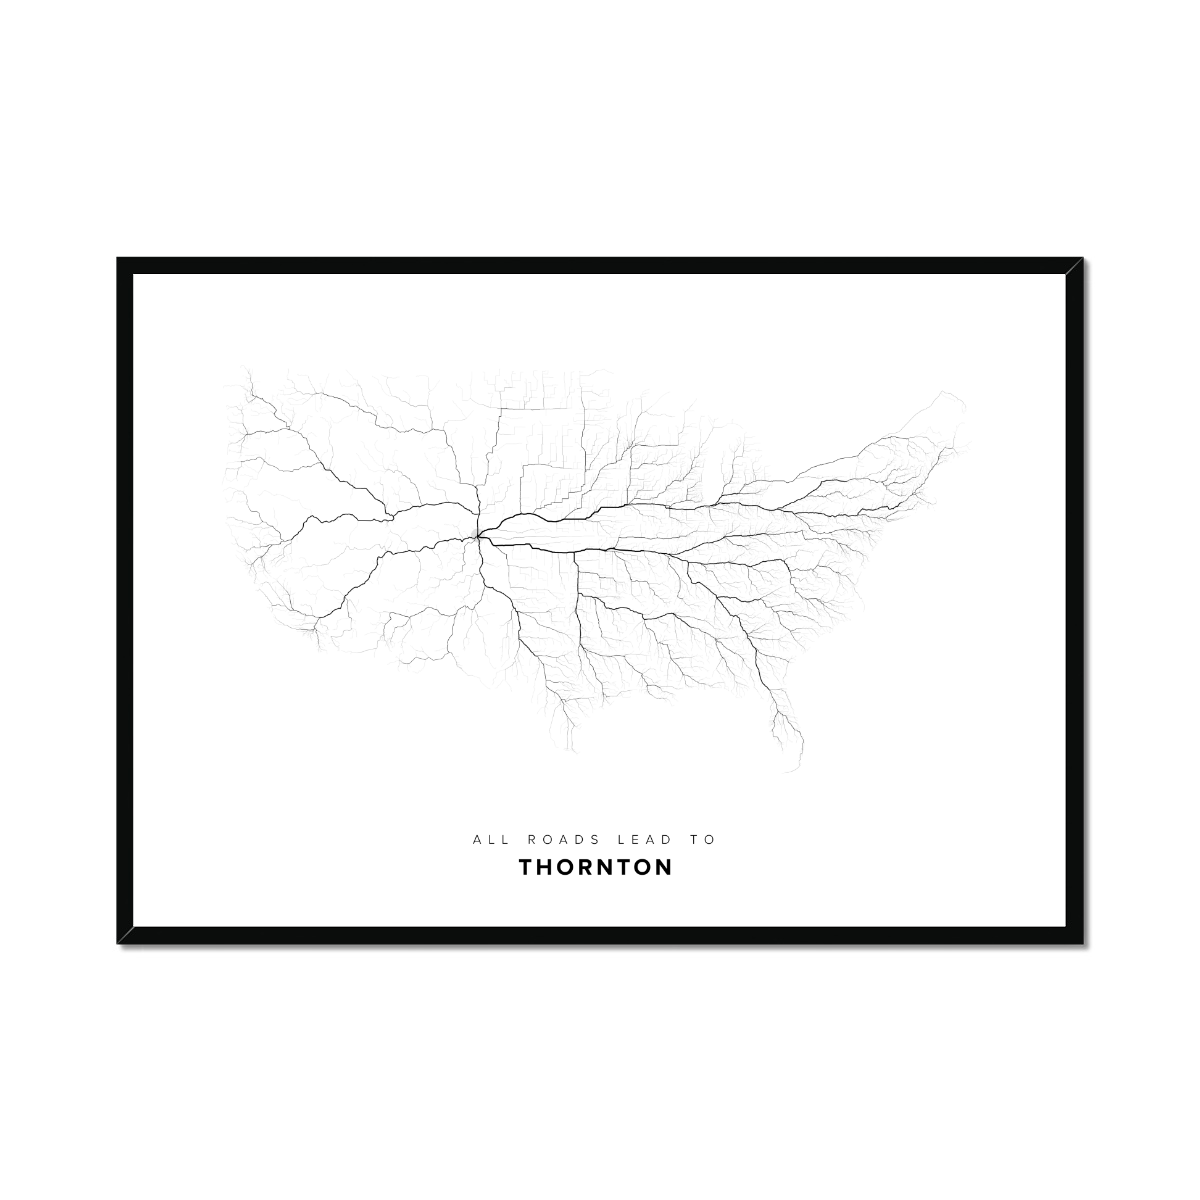 All roads lead to Thornton (United States of America) Fine Art Map Print